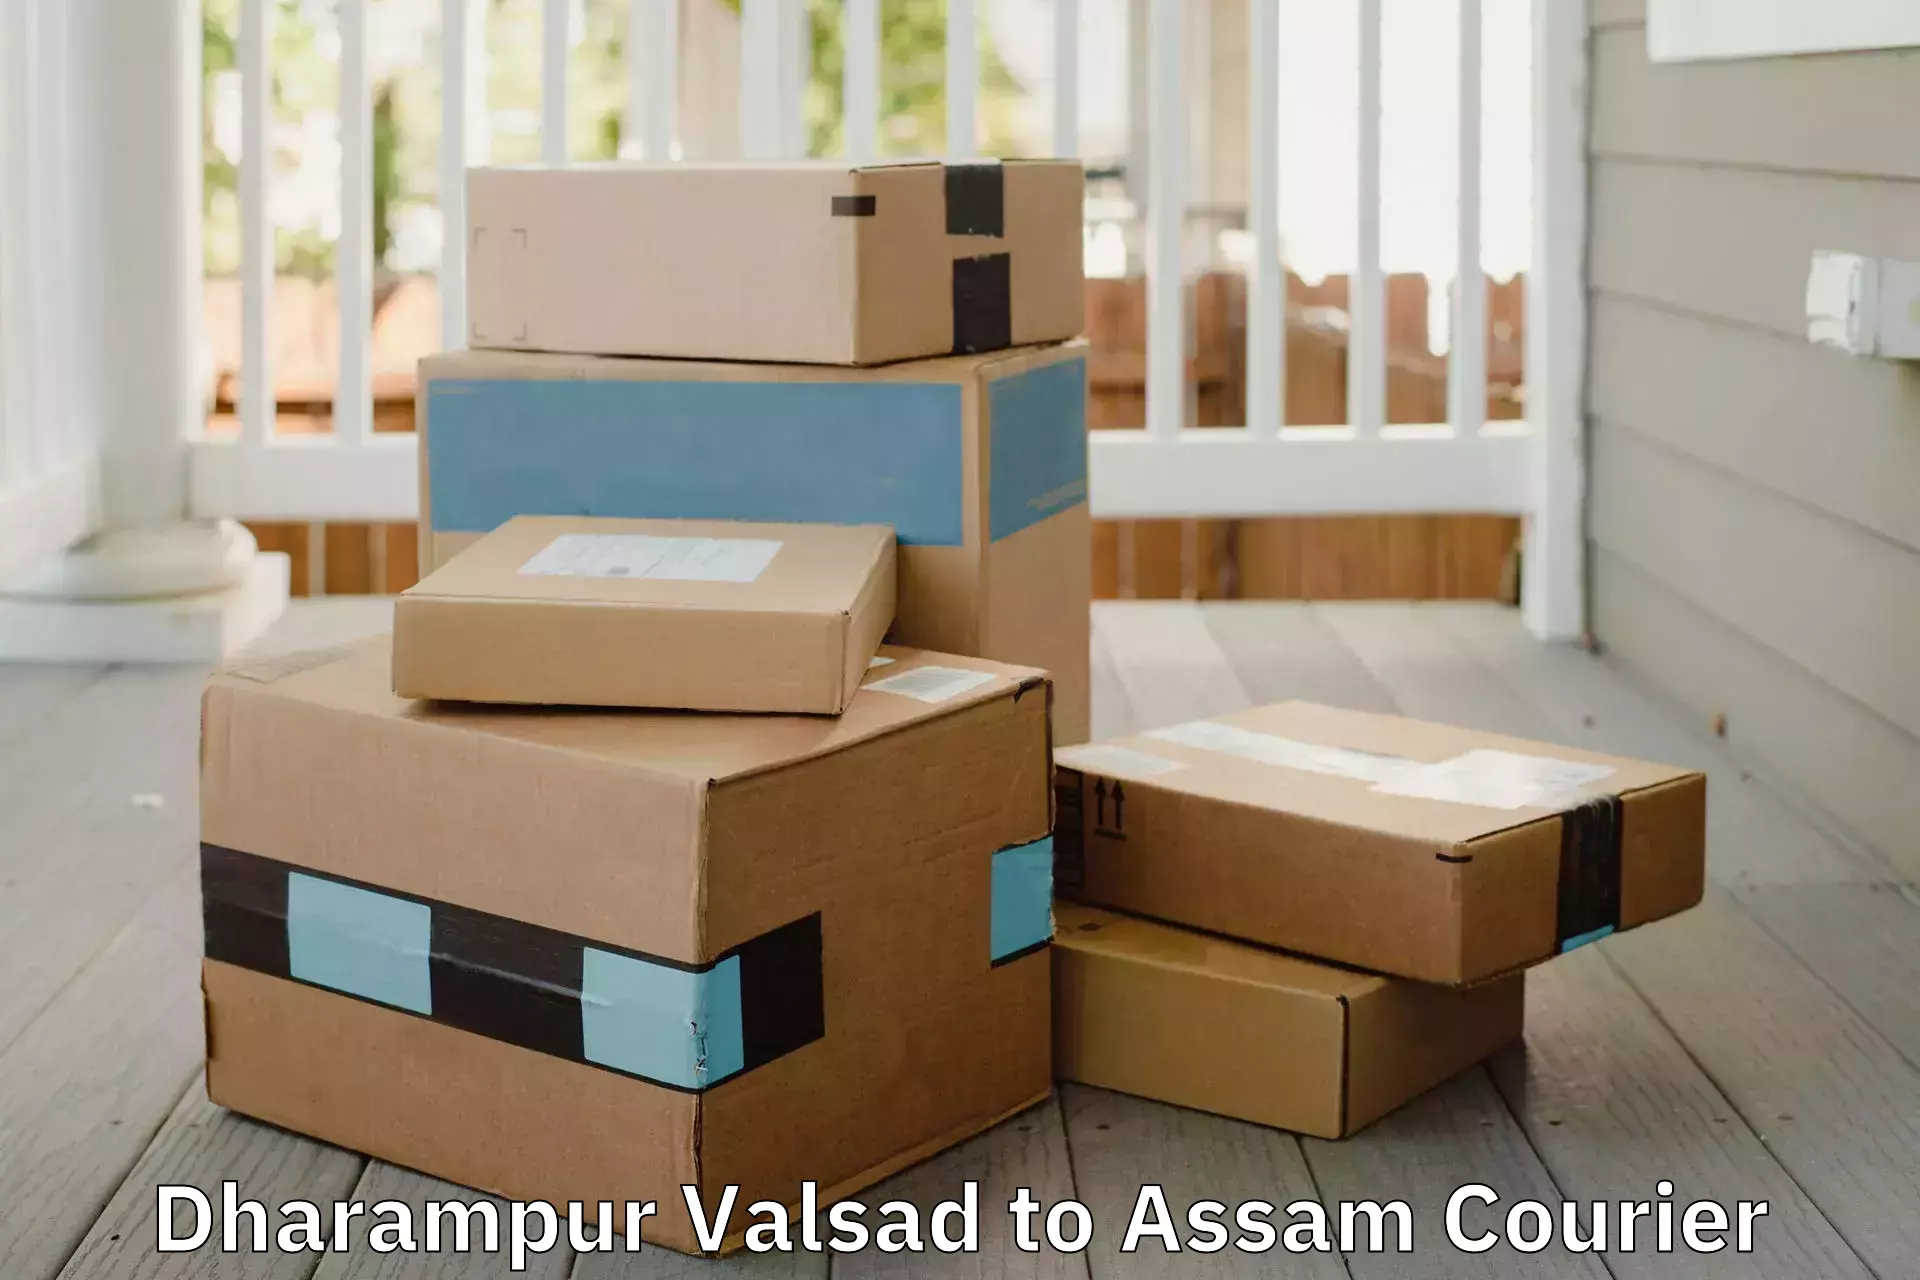 Furniture moving specialists Dharampur Valsad to Mayang